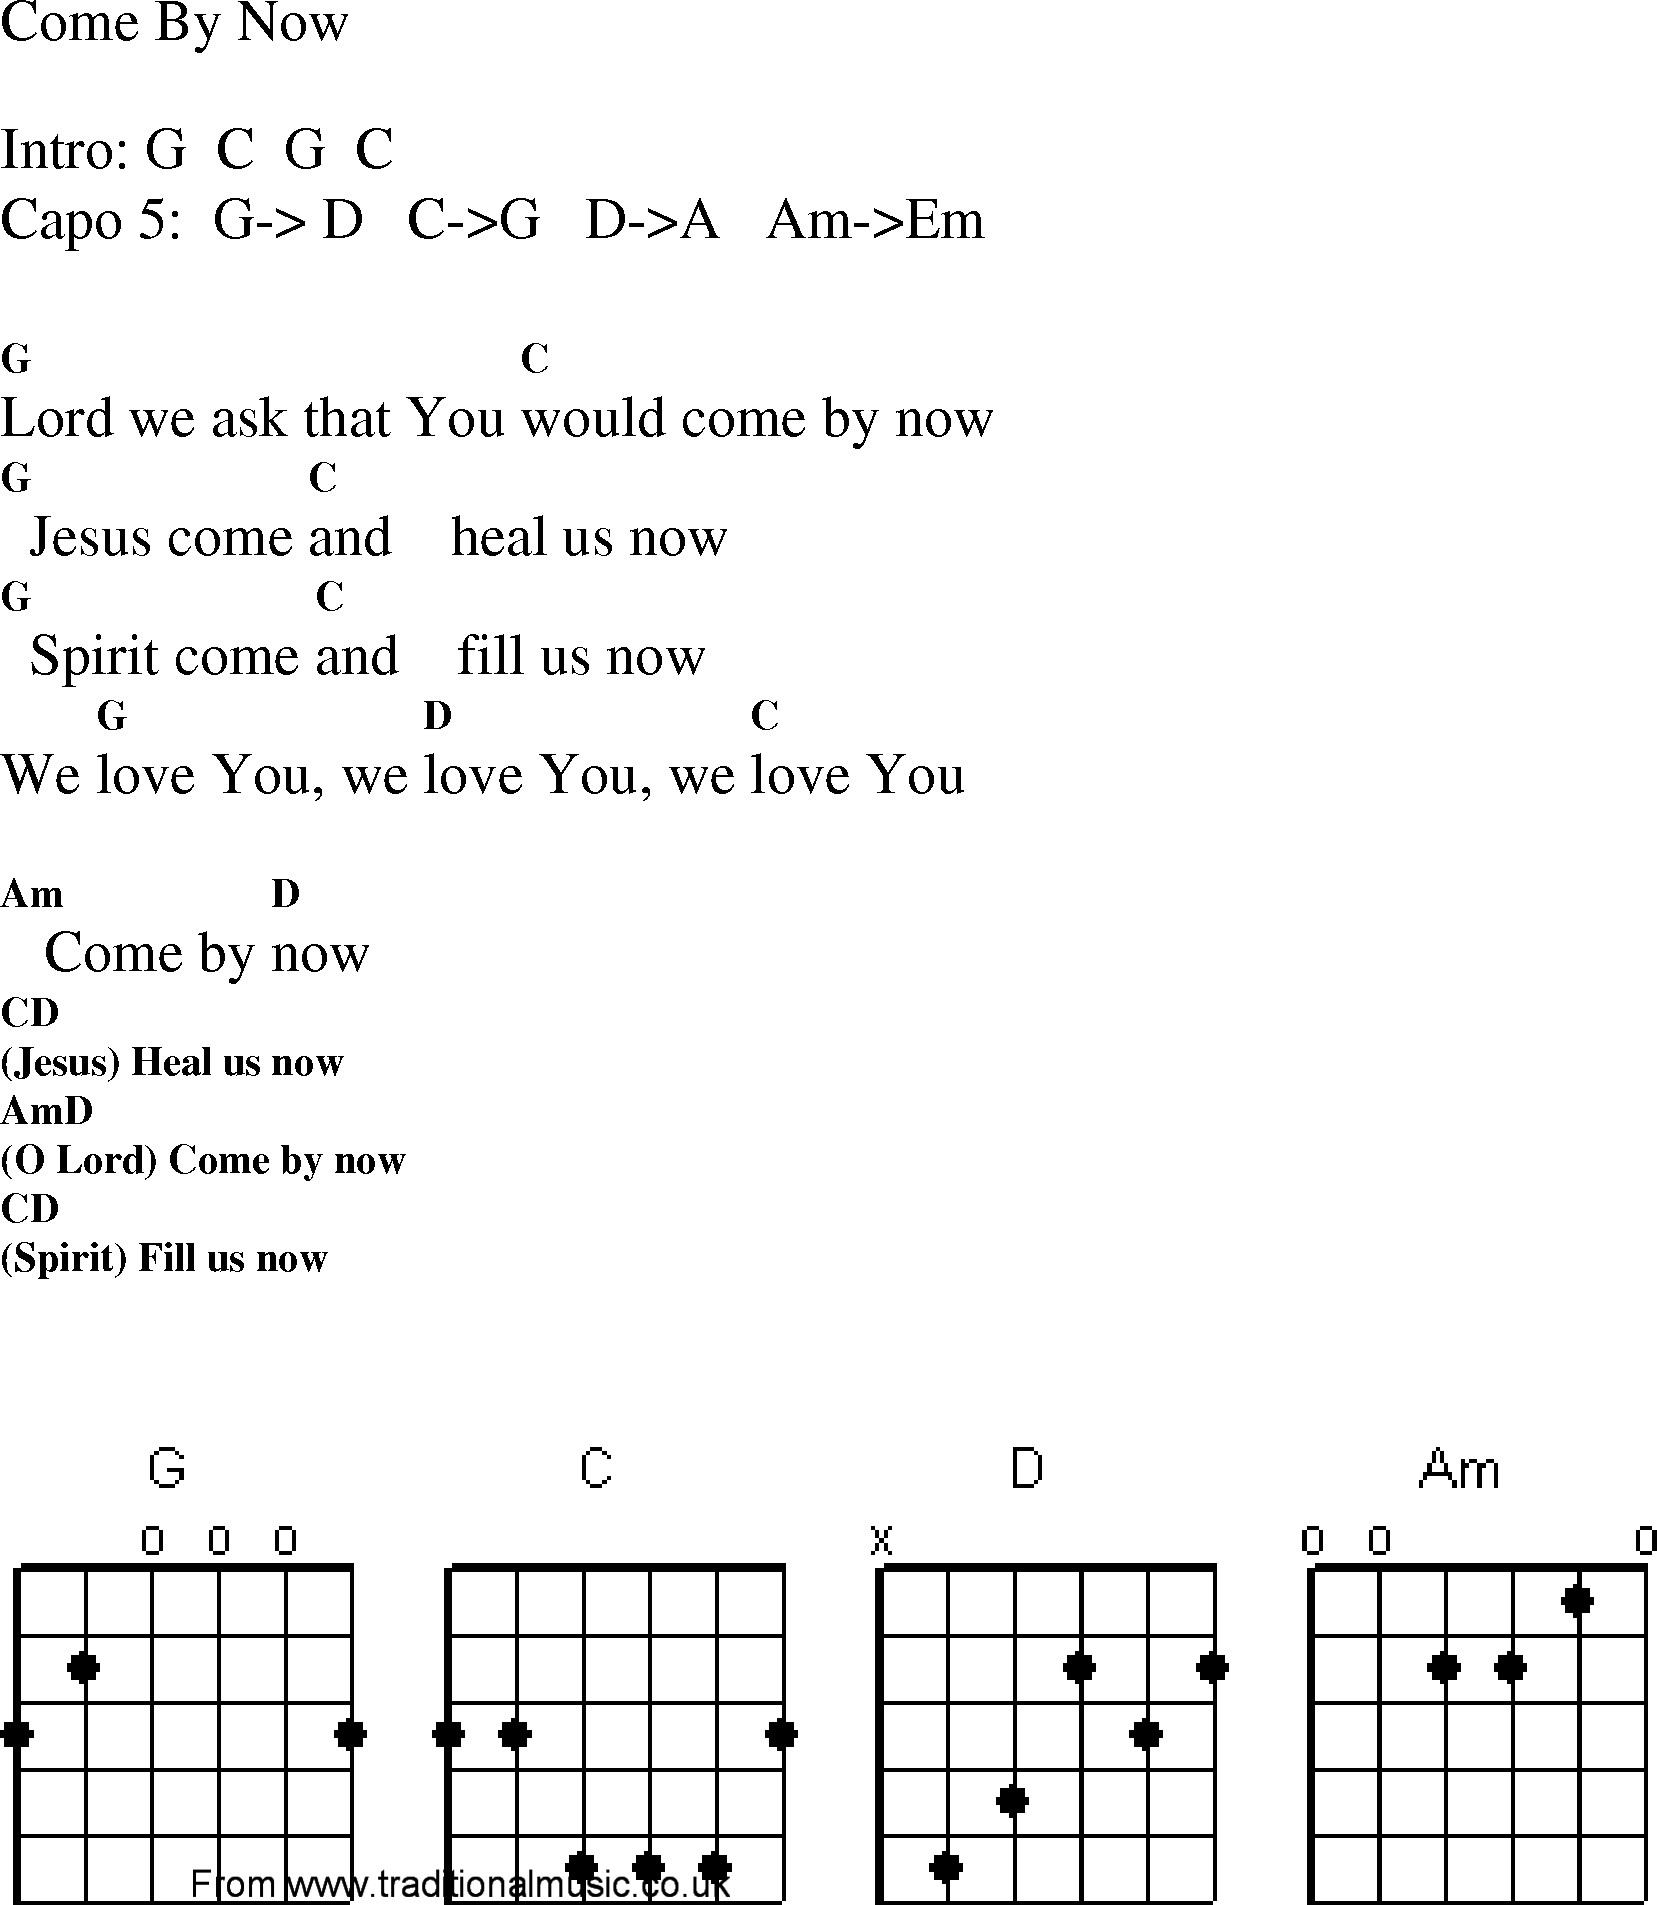 Gospel Song: come_by_now, lyrics and chords.